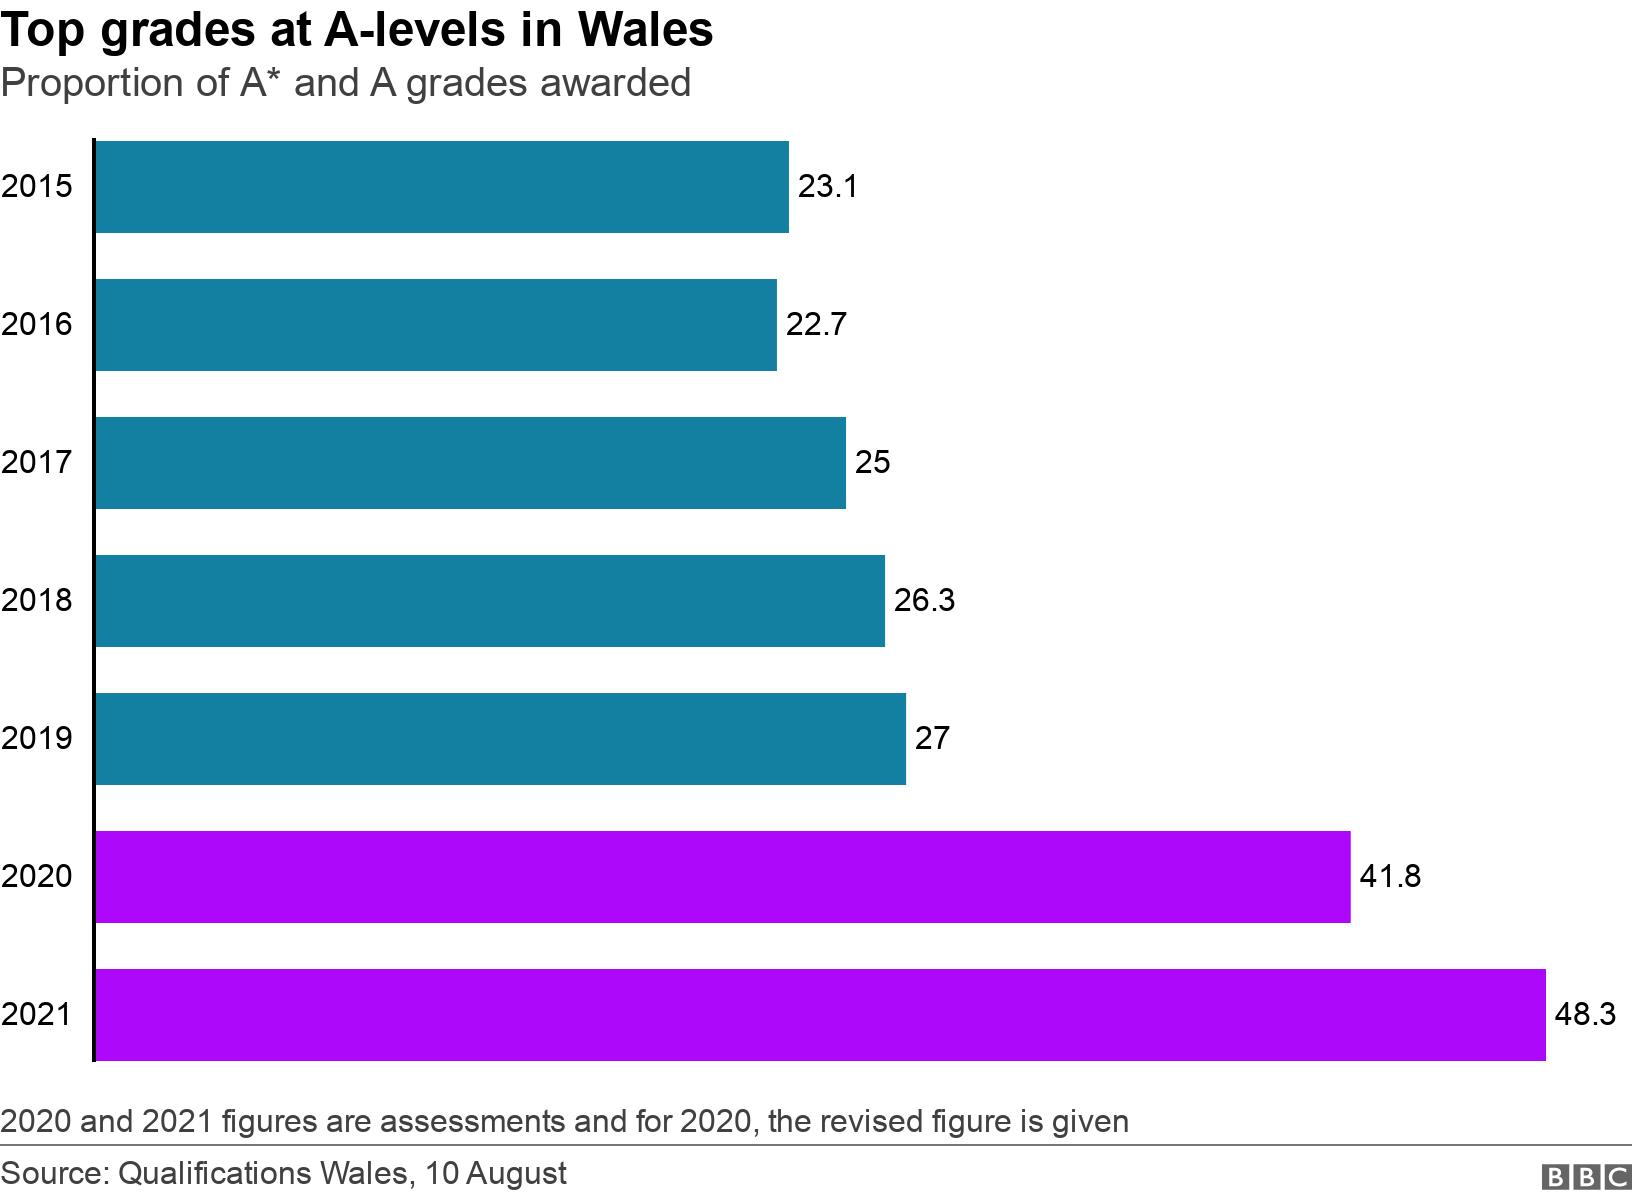 Top grades at A-levels in Wales. Proportion of A* and A grades awarded.  2020 and 2021 figures are assessments and for 2020, the revised figure is given.